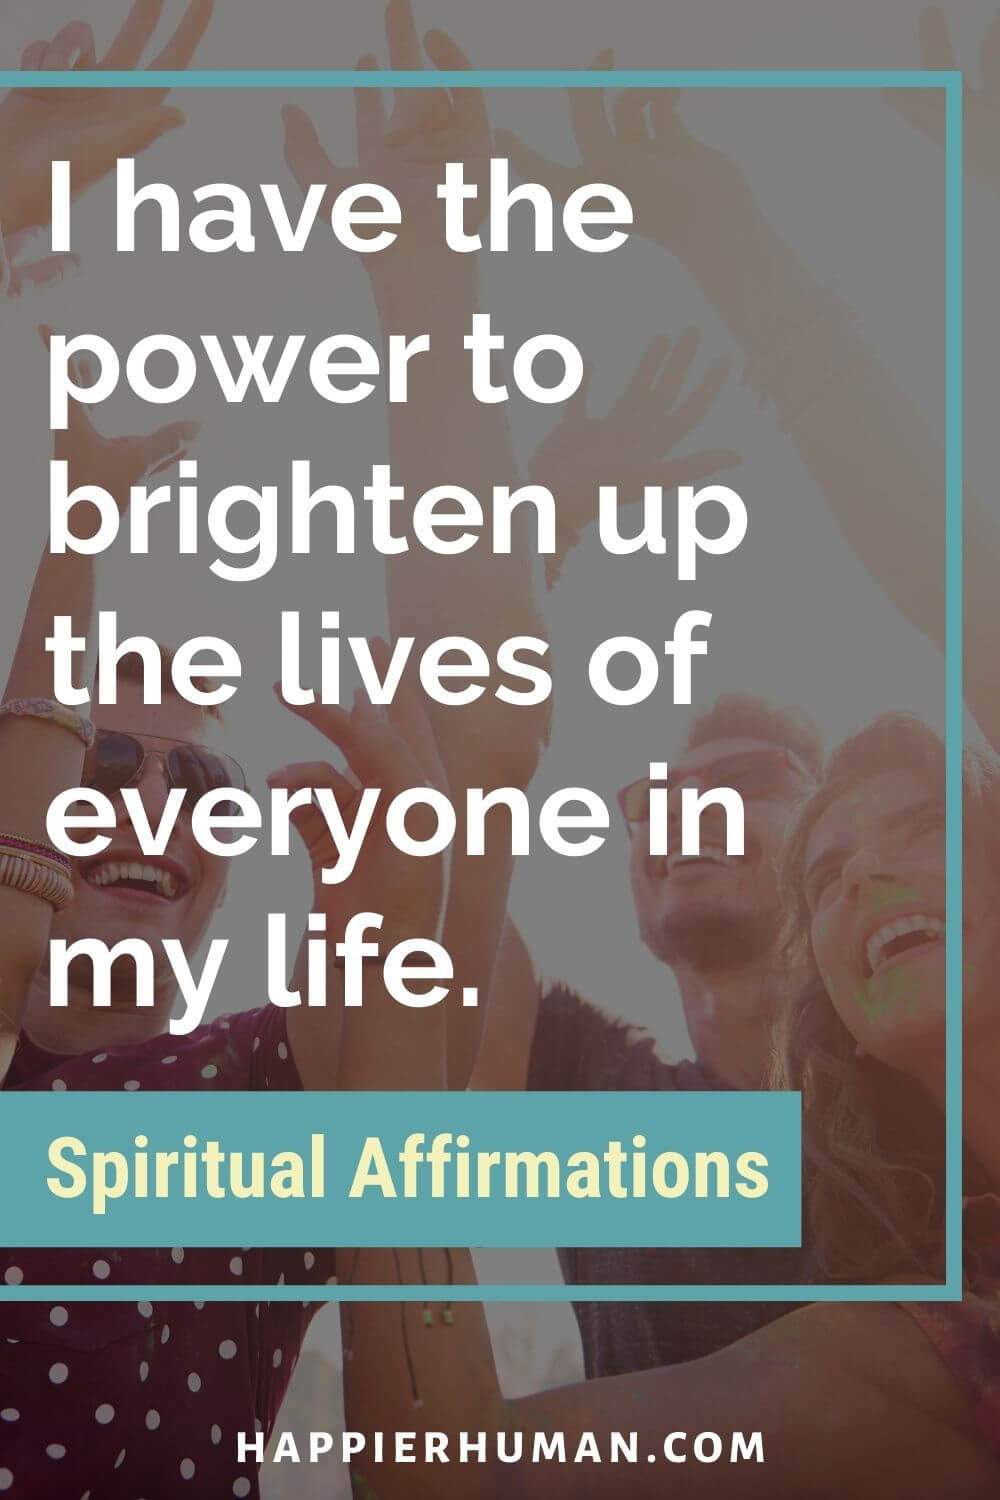 Spiritual Affirmations - I have the power to brighten up the lives of everyone in my life. | deep spiritual affirmations | spiritual affirmations pdf | spiritual affirmations for anxiety